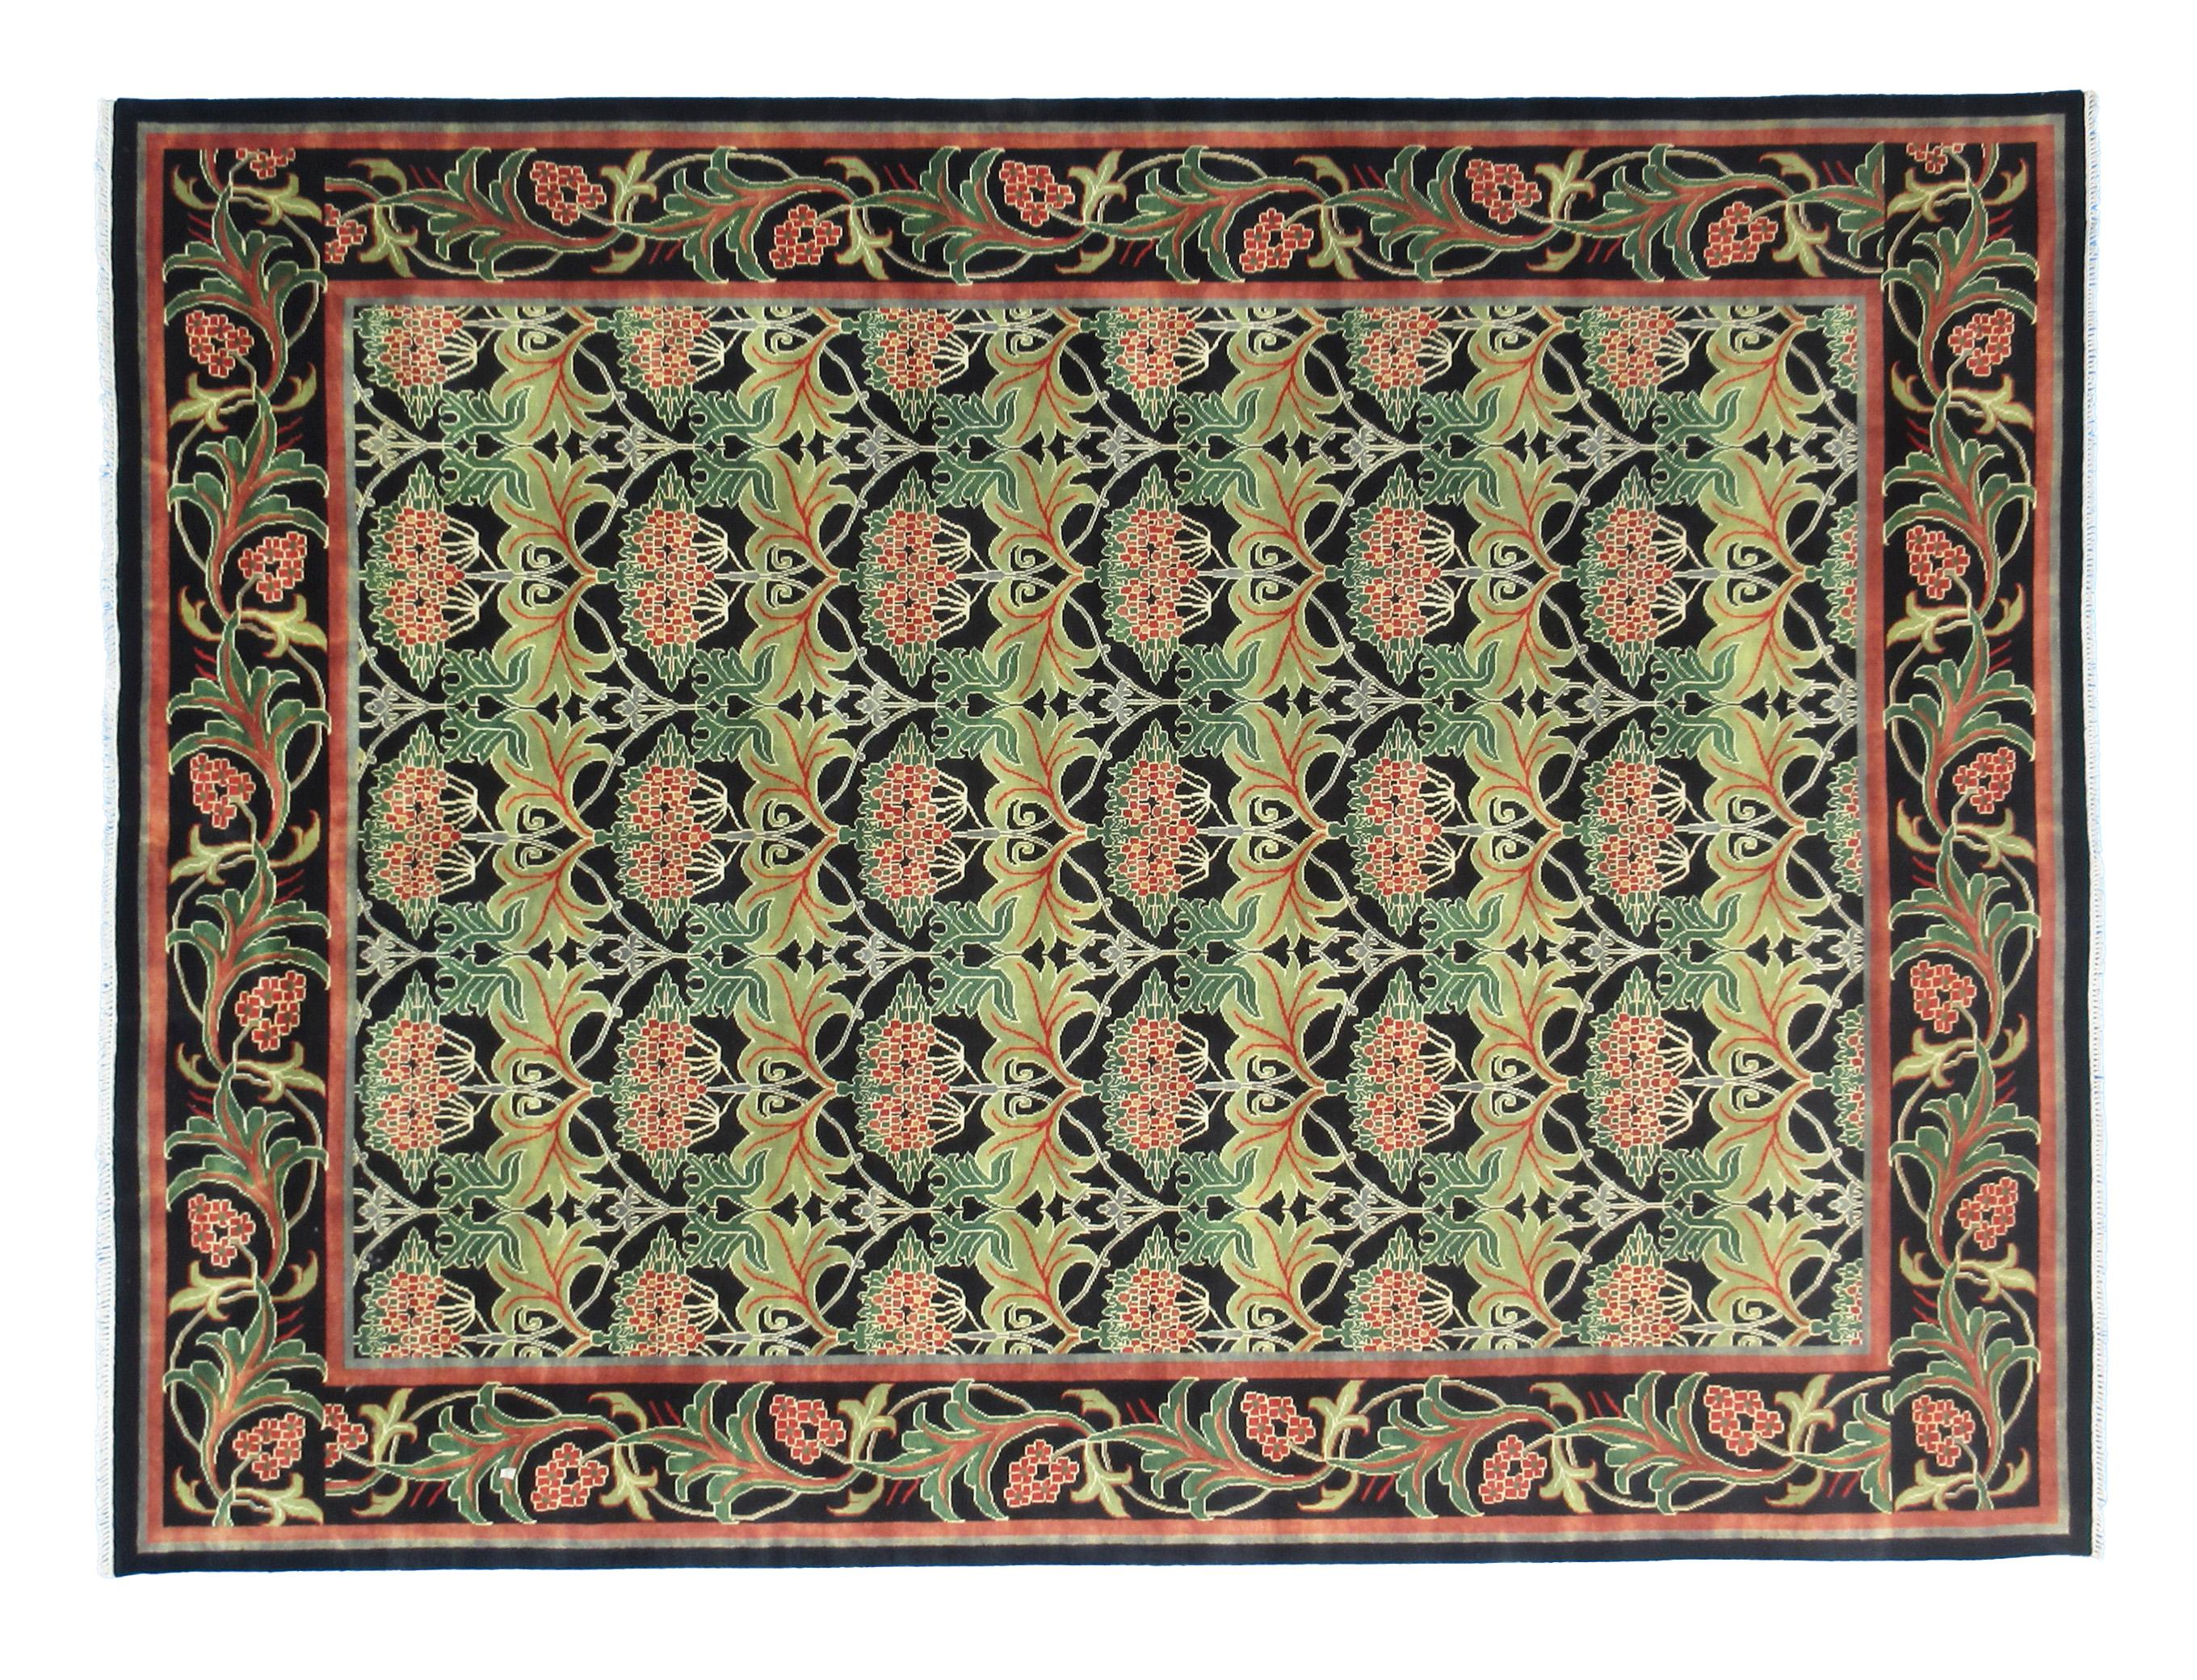 Hand-knotted, wool pile on a cotton foundation.

Field color: Black

Border color: Black

Accent colors: Green, red-orange.